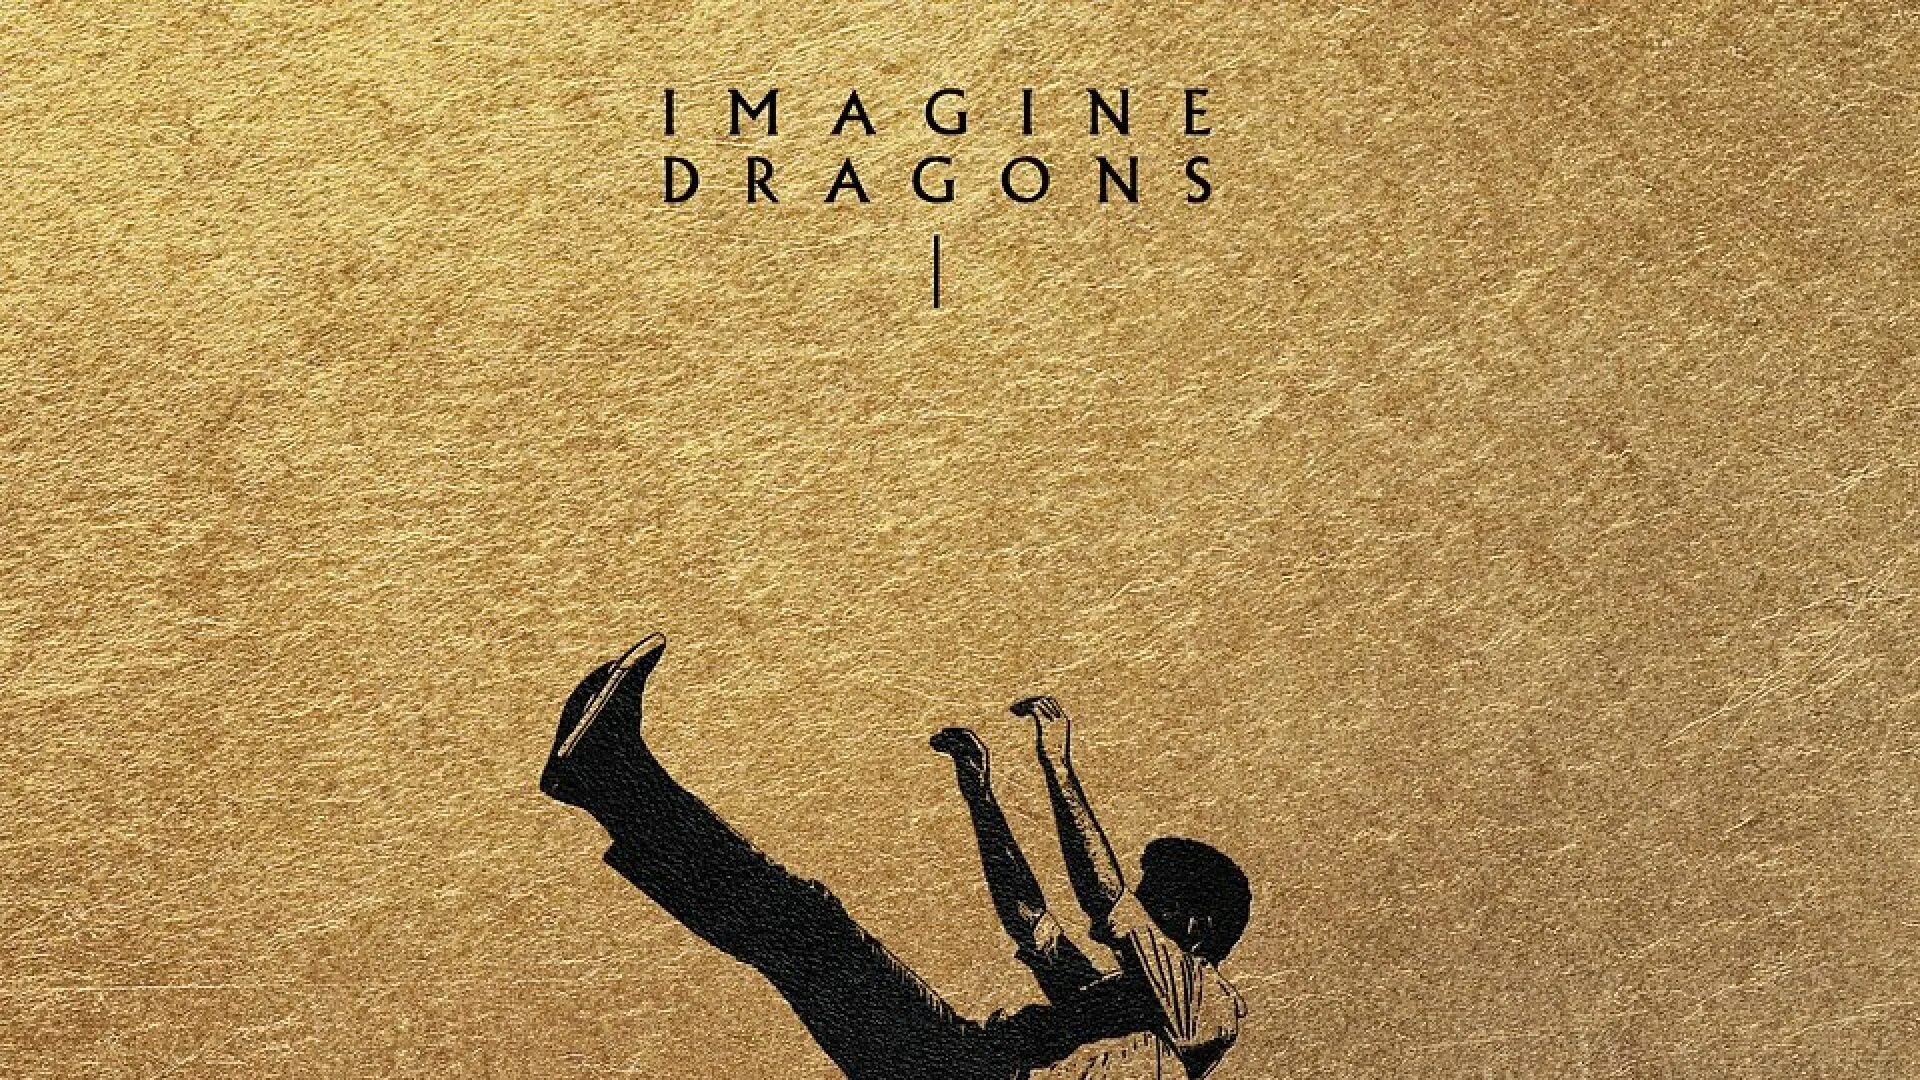 First imagine. Imagine Dragons Act 1. Imagine Dragons Mercury Act 1. Mercury — Act 1 (2021). Imagine Dragons Mercury Act 2.